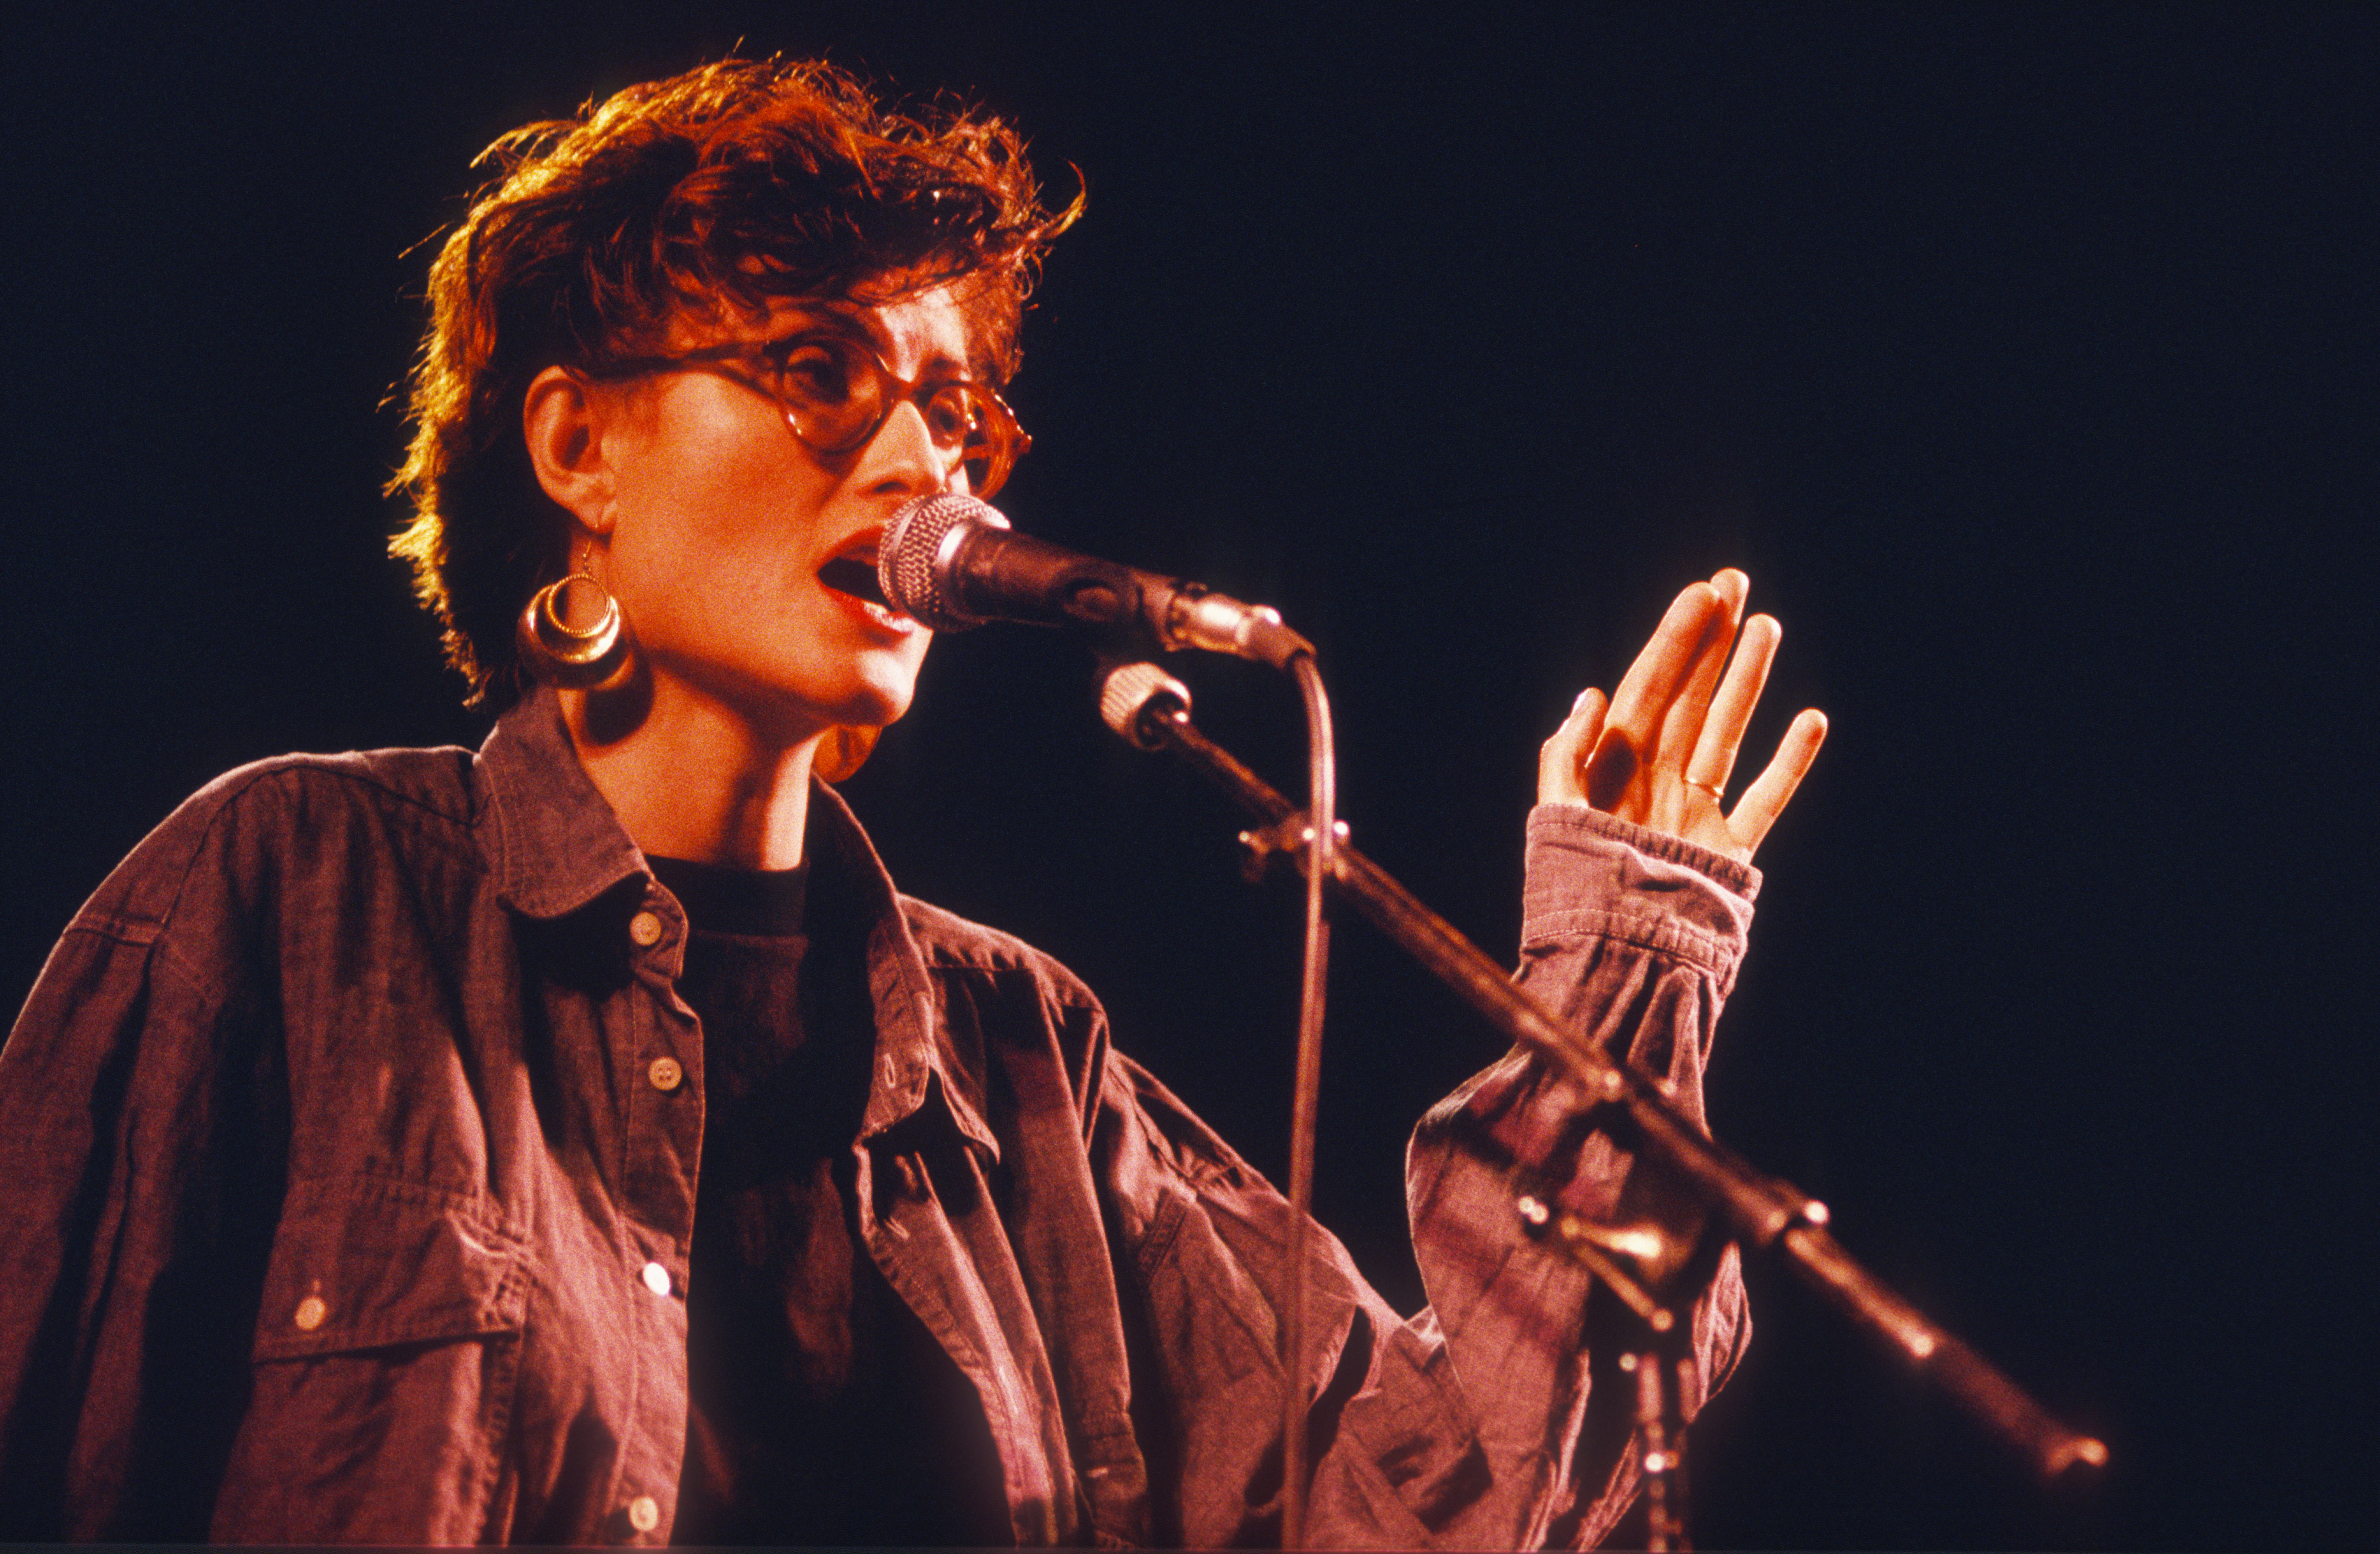 Lead singer Eddi Reader went on to carve out a successful solo career